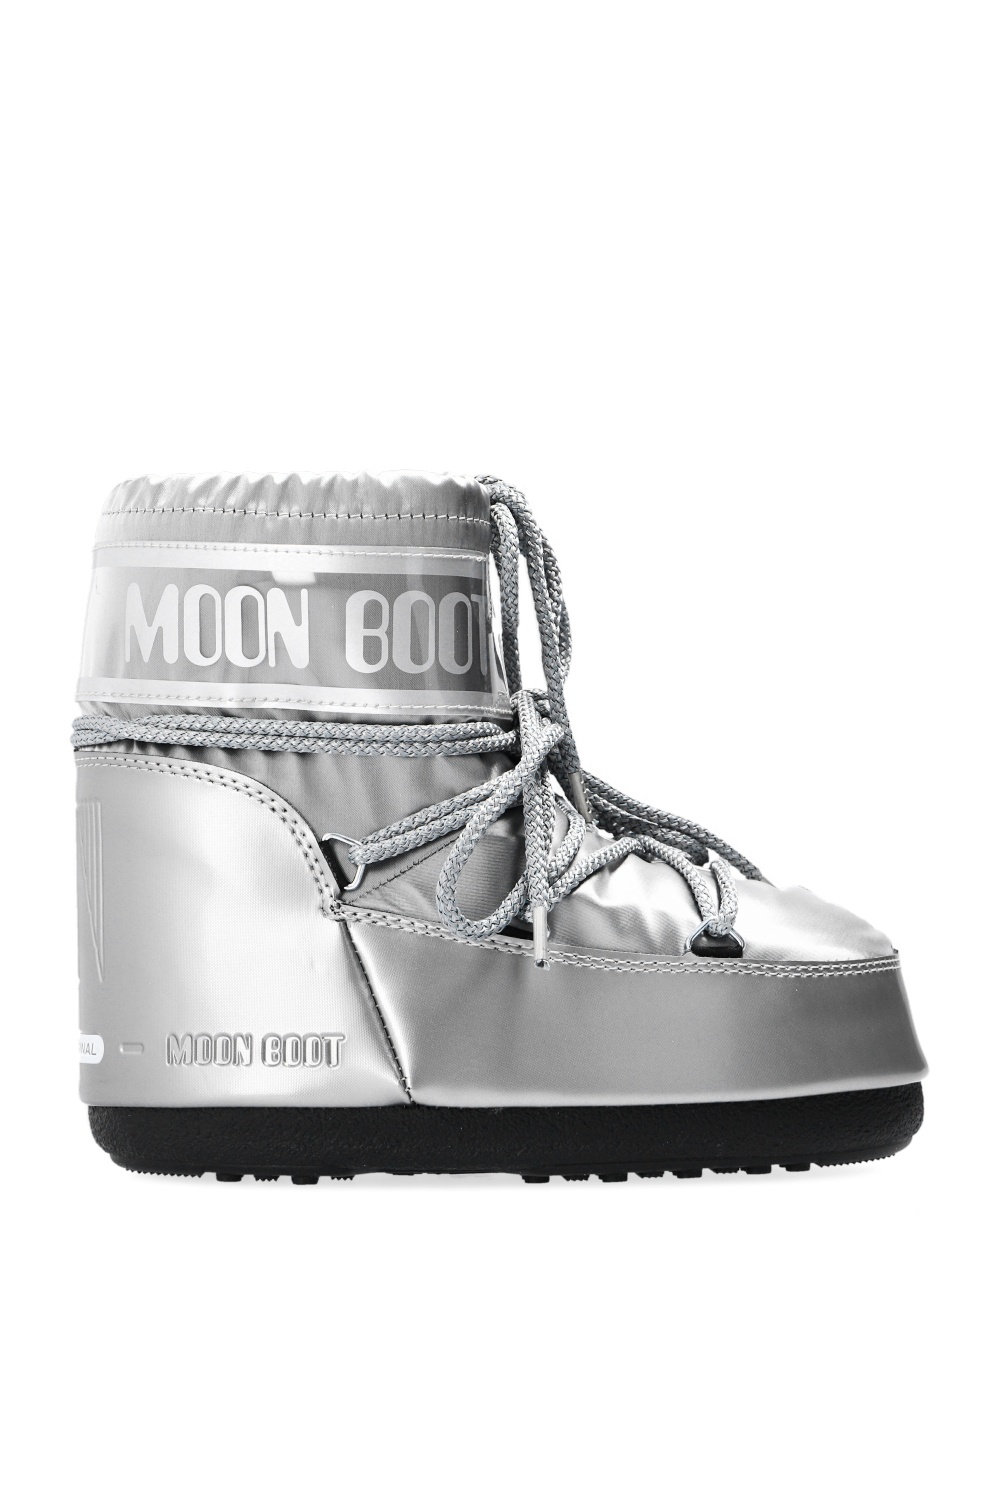 Moon Boot Kids ‘Classic Low Glance’ snow boots